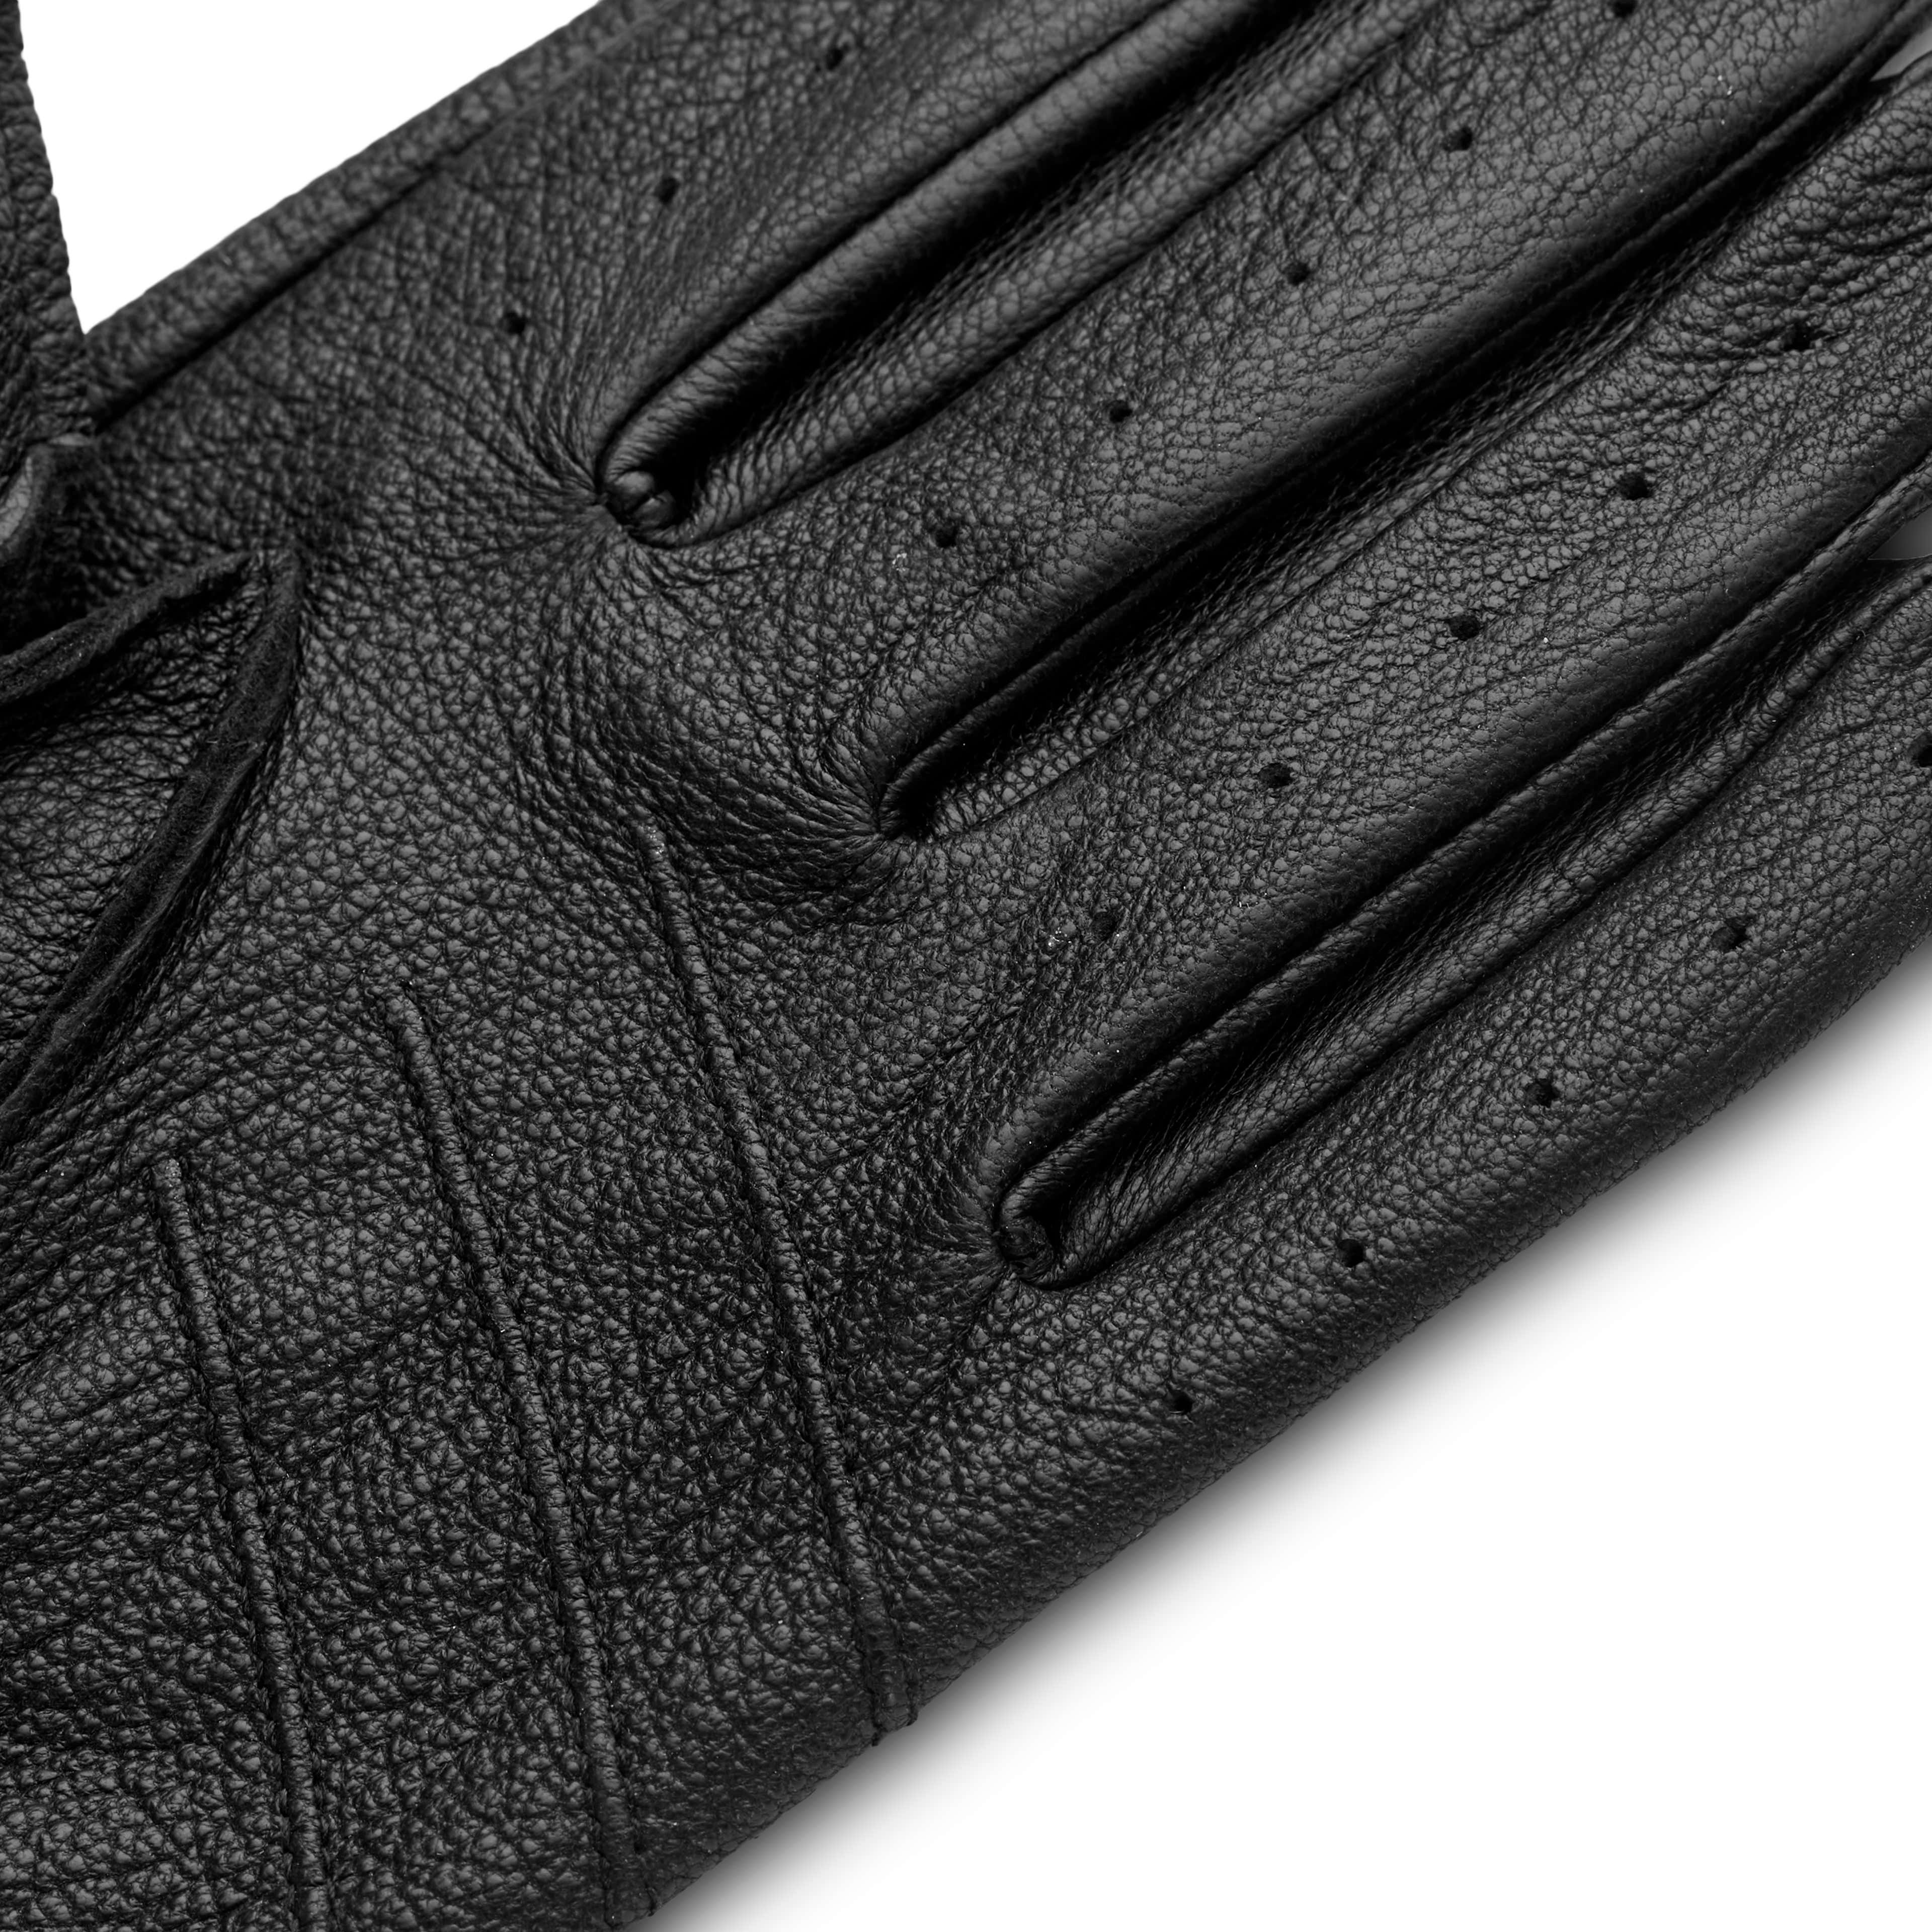 Black Sheep Leather Driving Gloves  - 7 - gallery